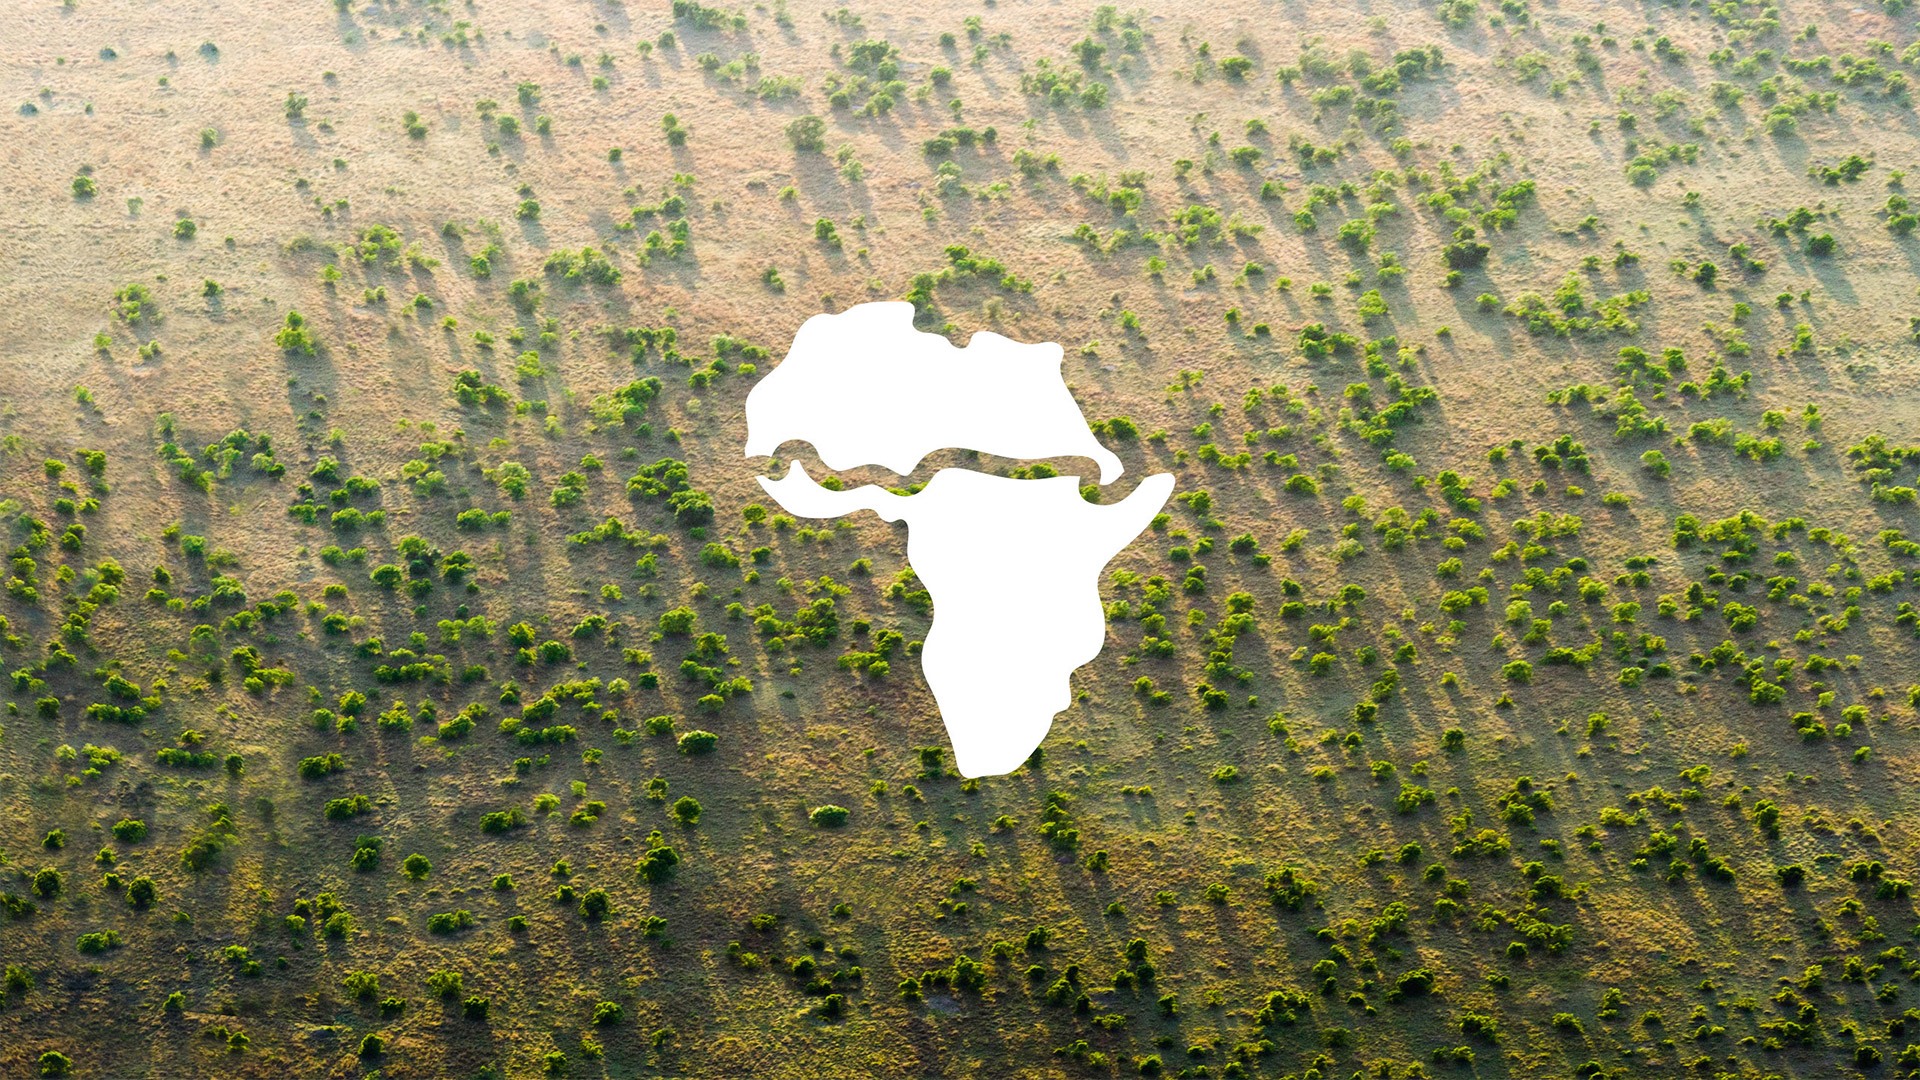 Africa Is Building A Great Wall To Stand Defiant Against Poverty, Climate Change, And Despair